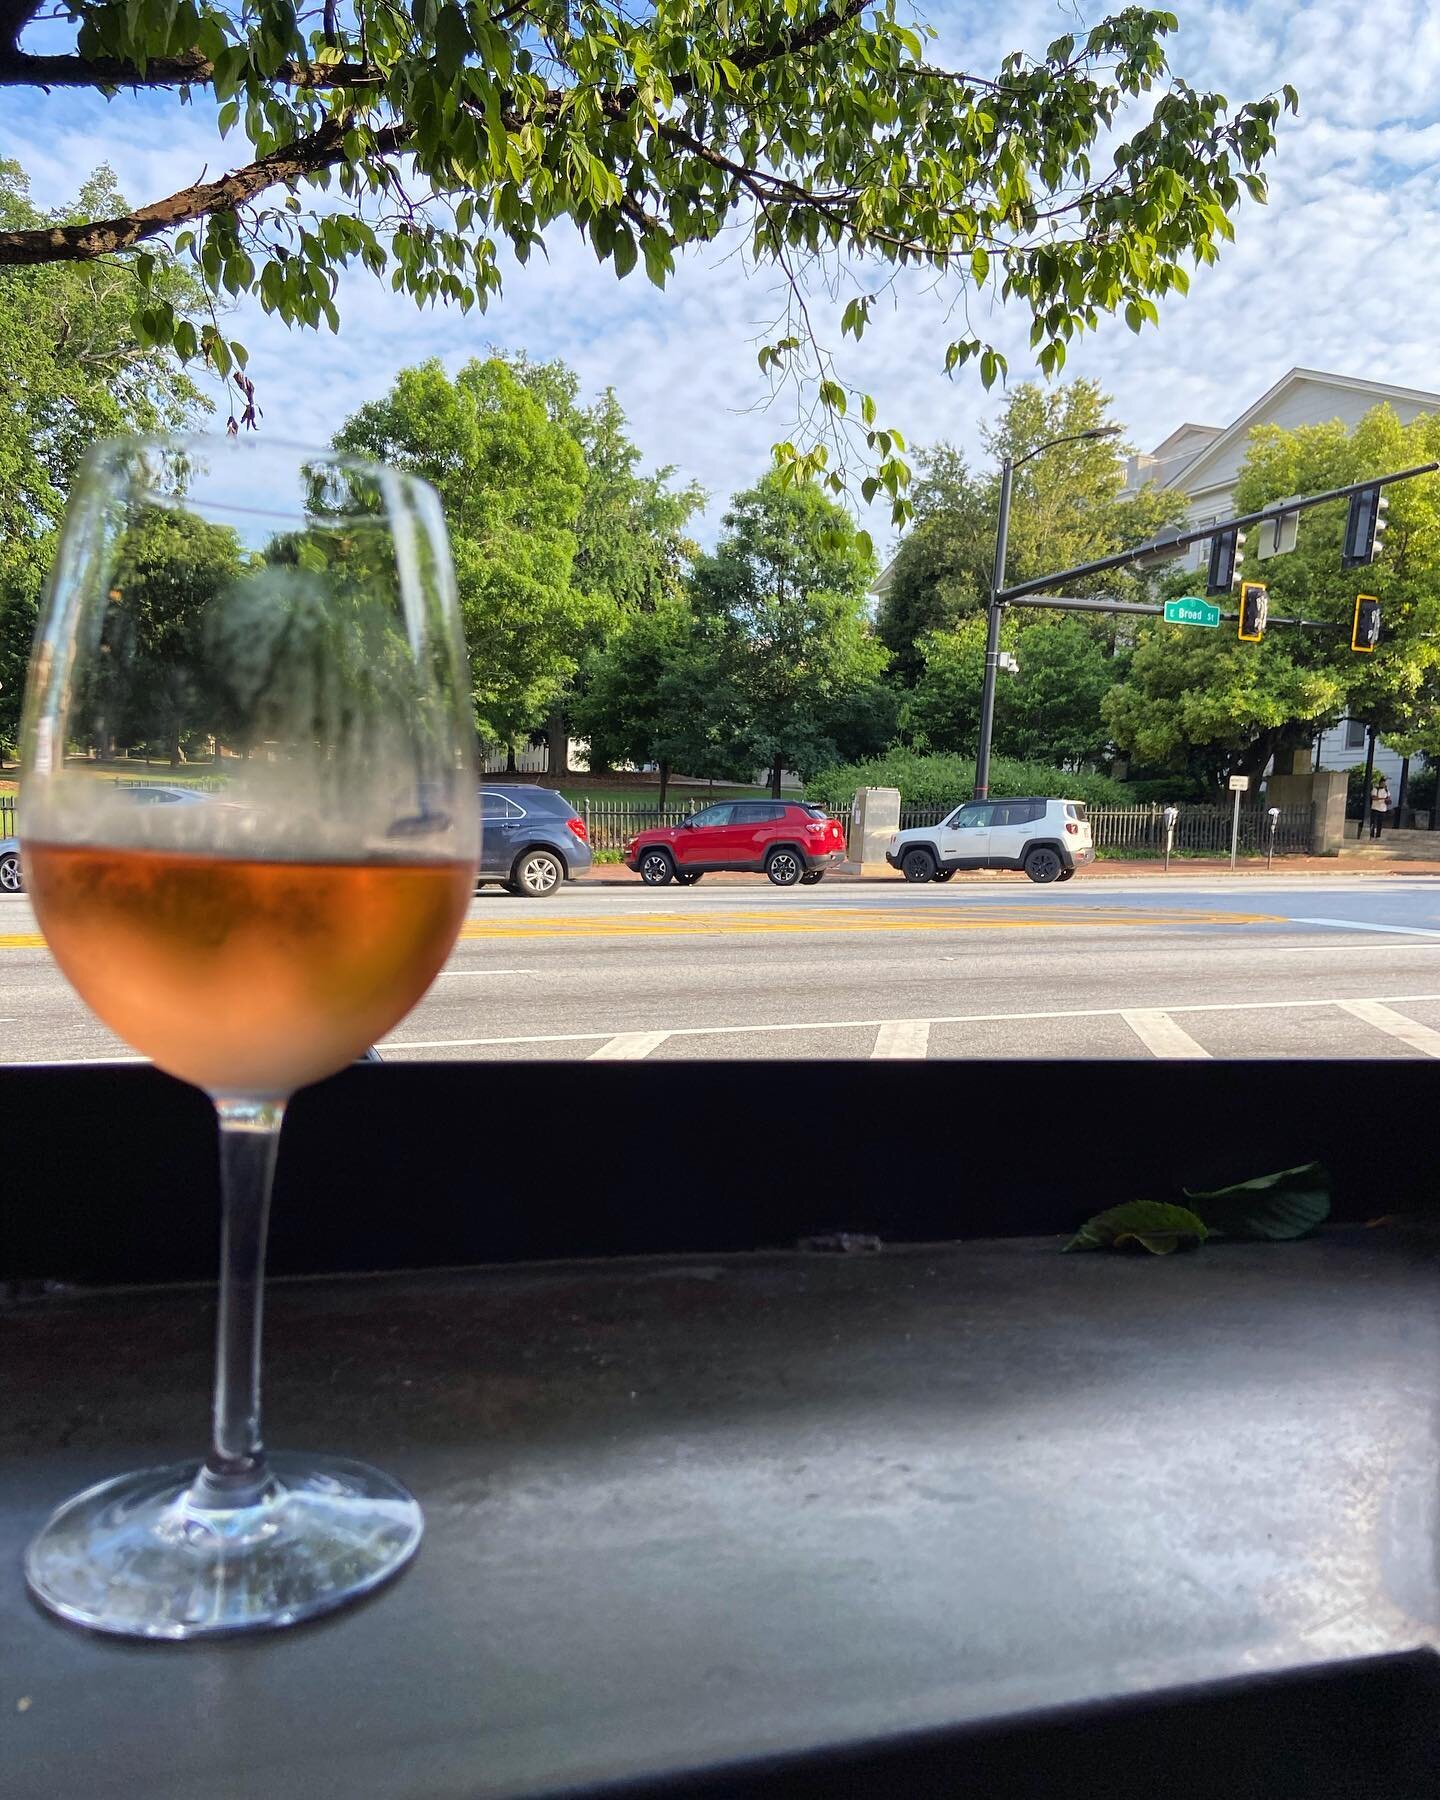 Everyone knows about the Dad Beer but next time you get take out, grab a Mom Wine while you wait! Nothing like a ros&eacute; to end the day.
#ThePlaceAthens